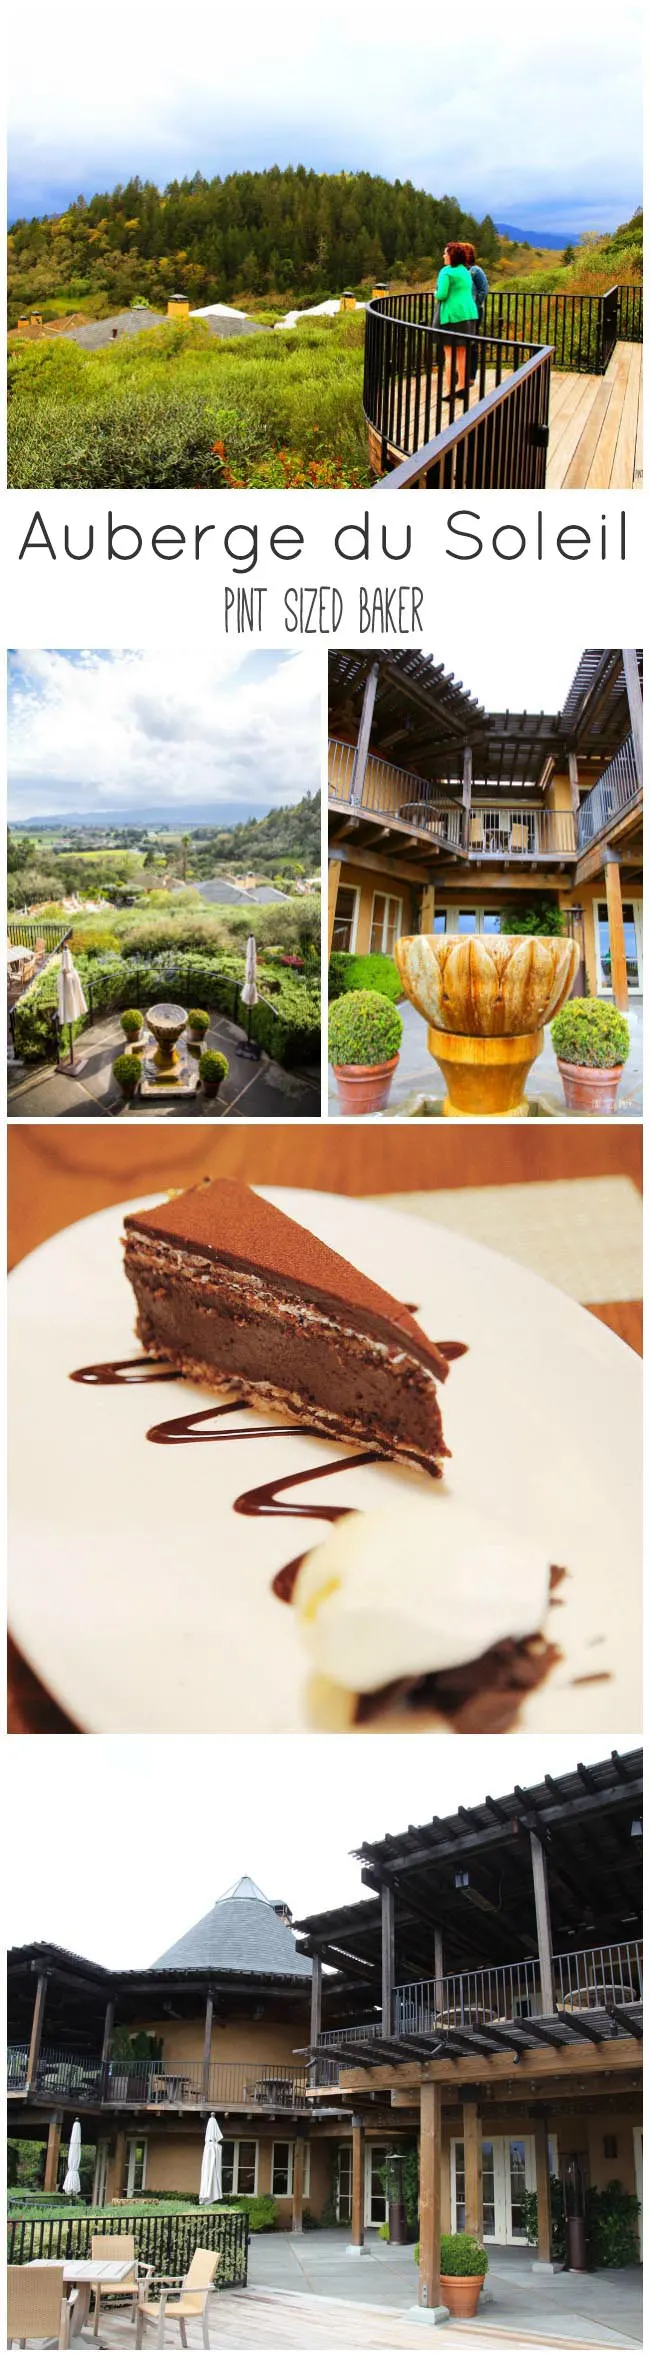 A stop in for the views at Auberge de Soleil in Napa Valley wouldn't be complete without a slice of their famous Hazelnut Daquoise. OMG! Amazing!